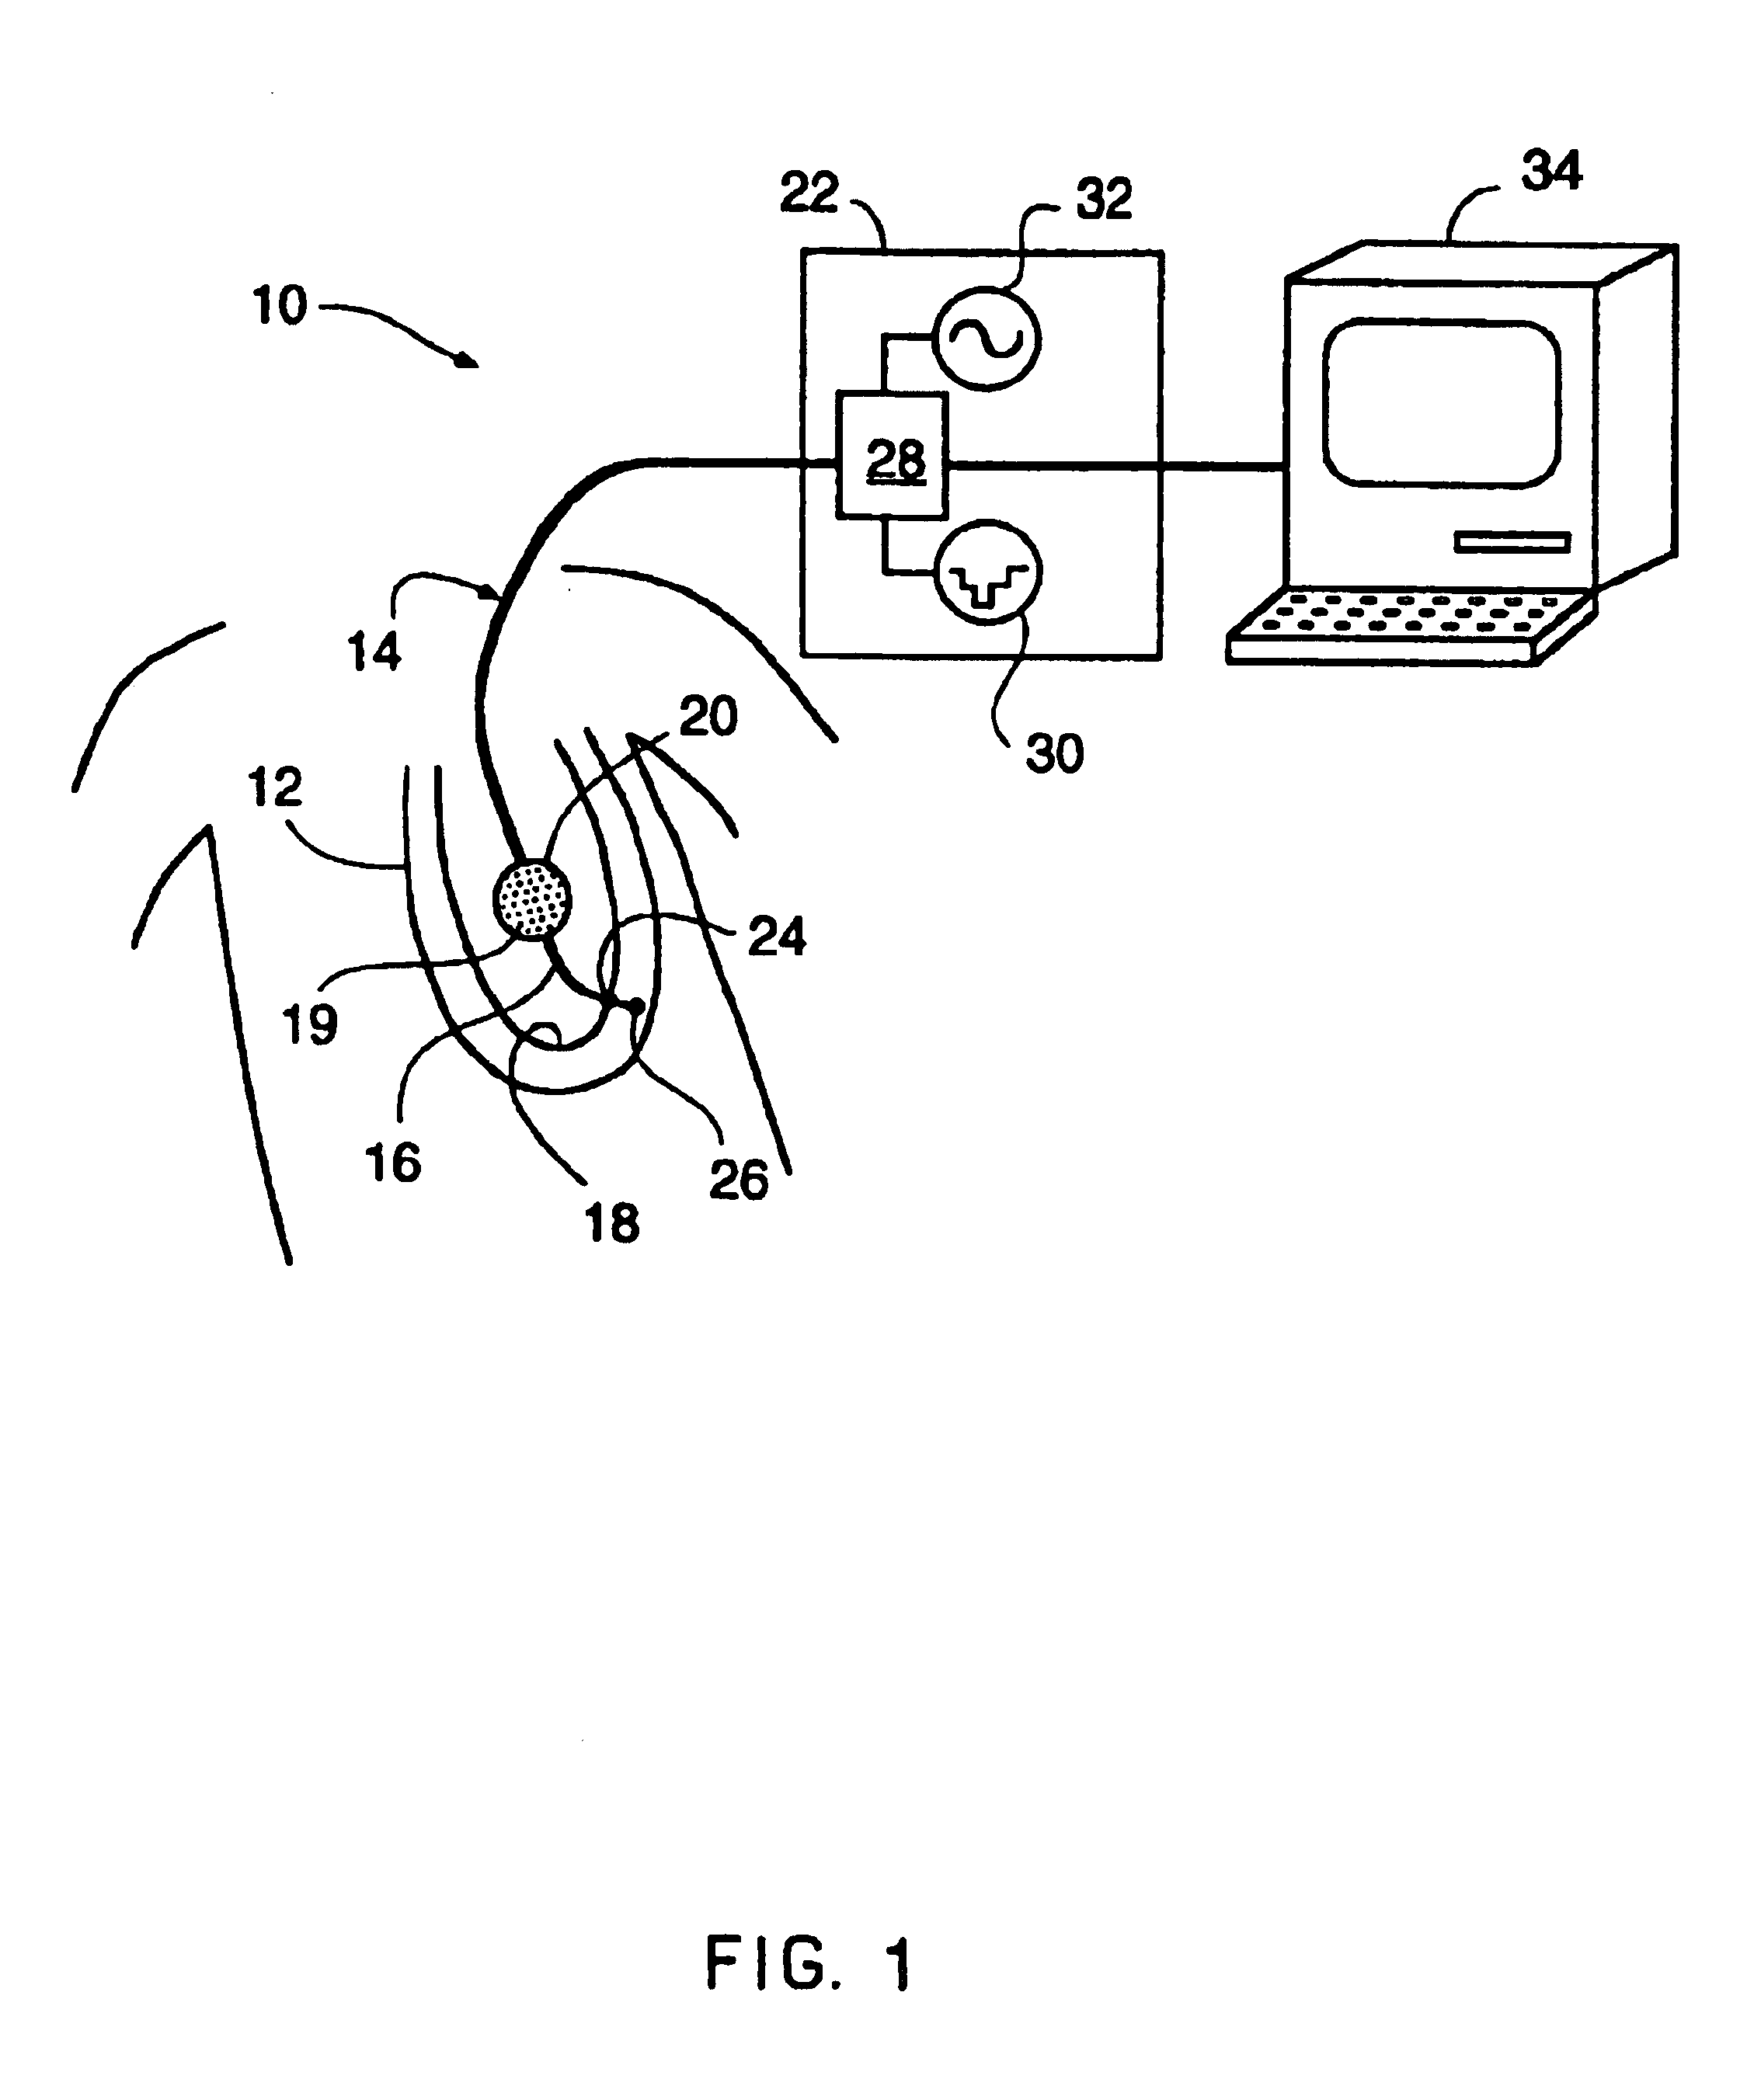 Method of mapping a plug in a mapping catheter